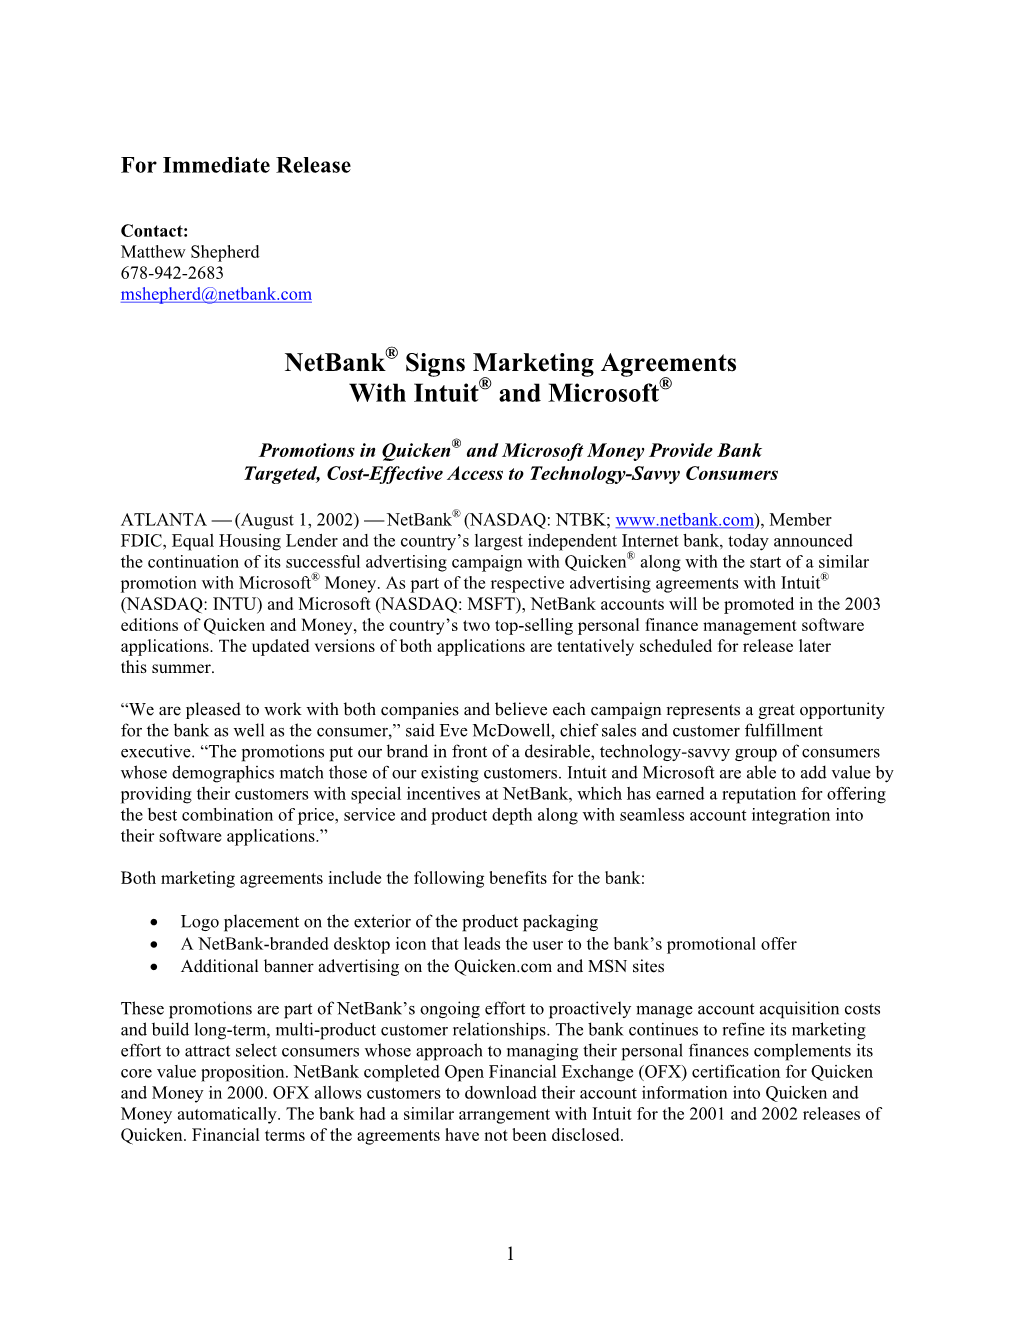 Netbank® Signs Marketing Agreements with Intuit® and Microsoft®